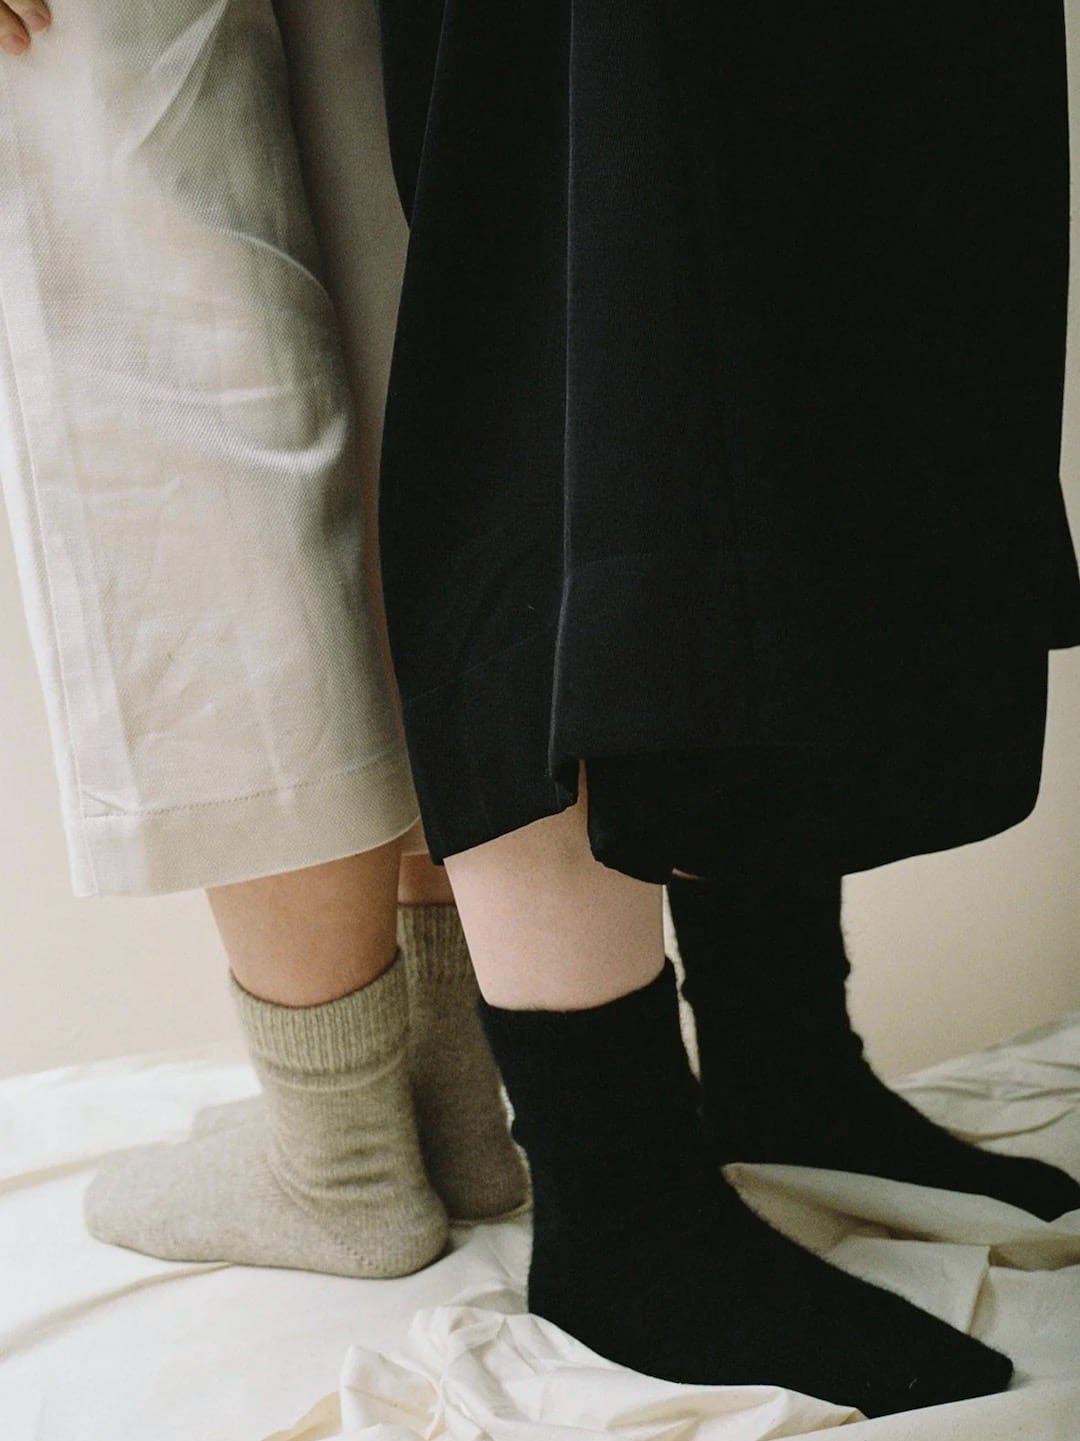 Two people standing side by side in New Zealand, with the camera focused on their lower half, wearing different colored Francie Possum Merino socks and pants.